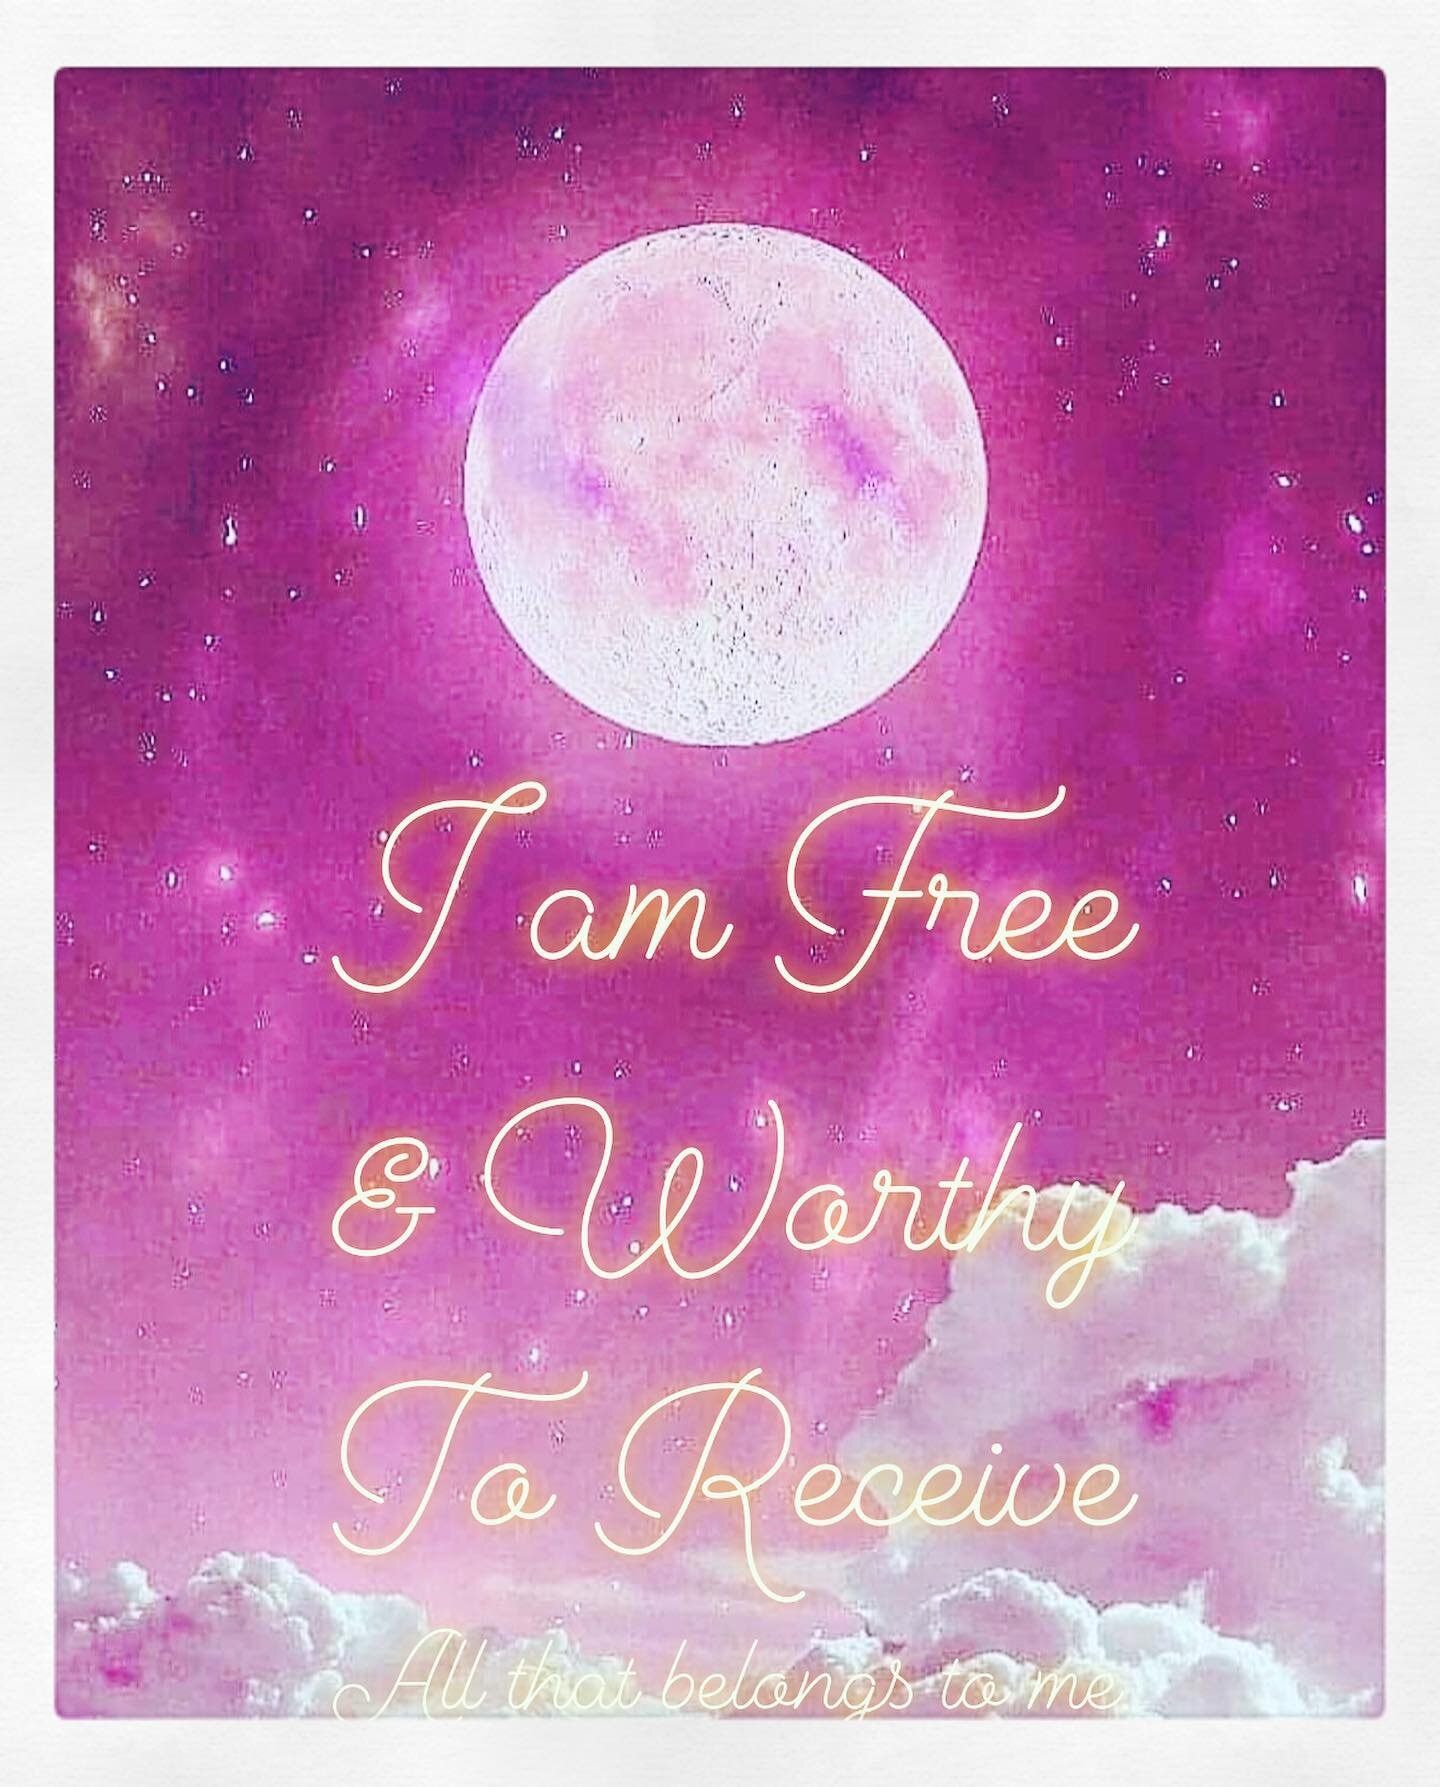 I am embracing the darkness and scary stories of the psyche that are being brought up to the surface - making greater space for more light &amp; beauty to enter my being.

Allowing. Releasing. Being.

Holding space for it all.

Not feeding into the n